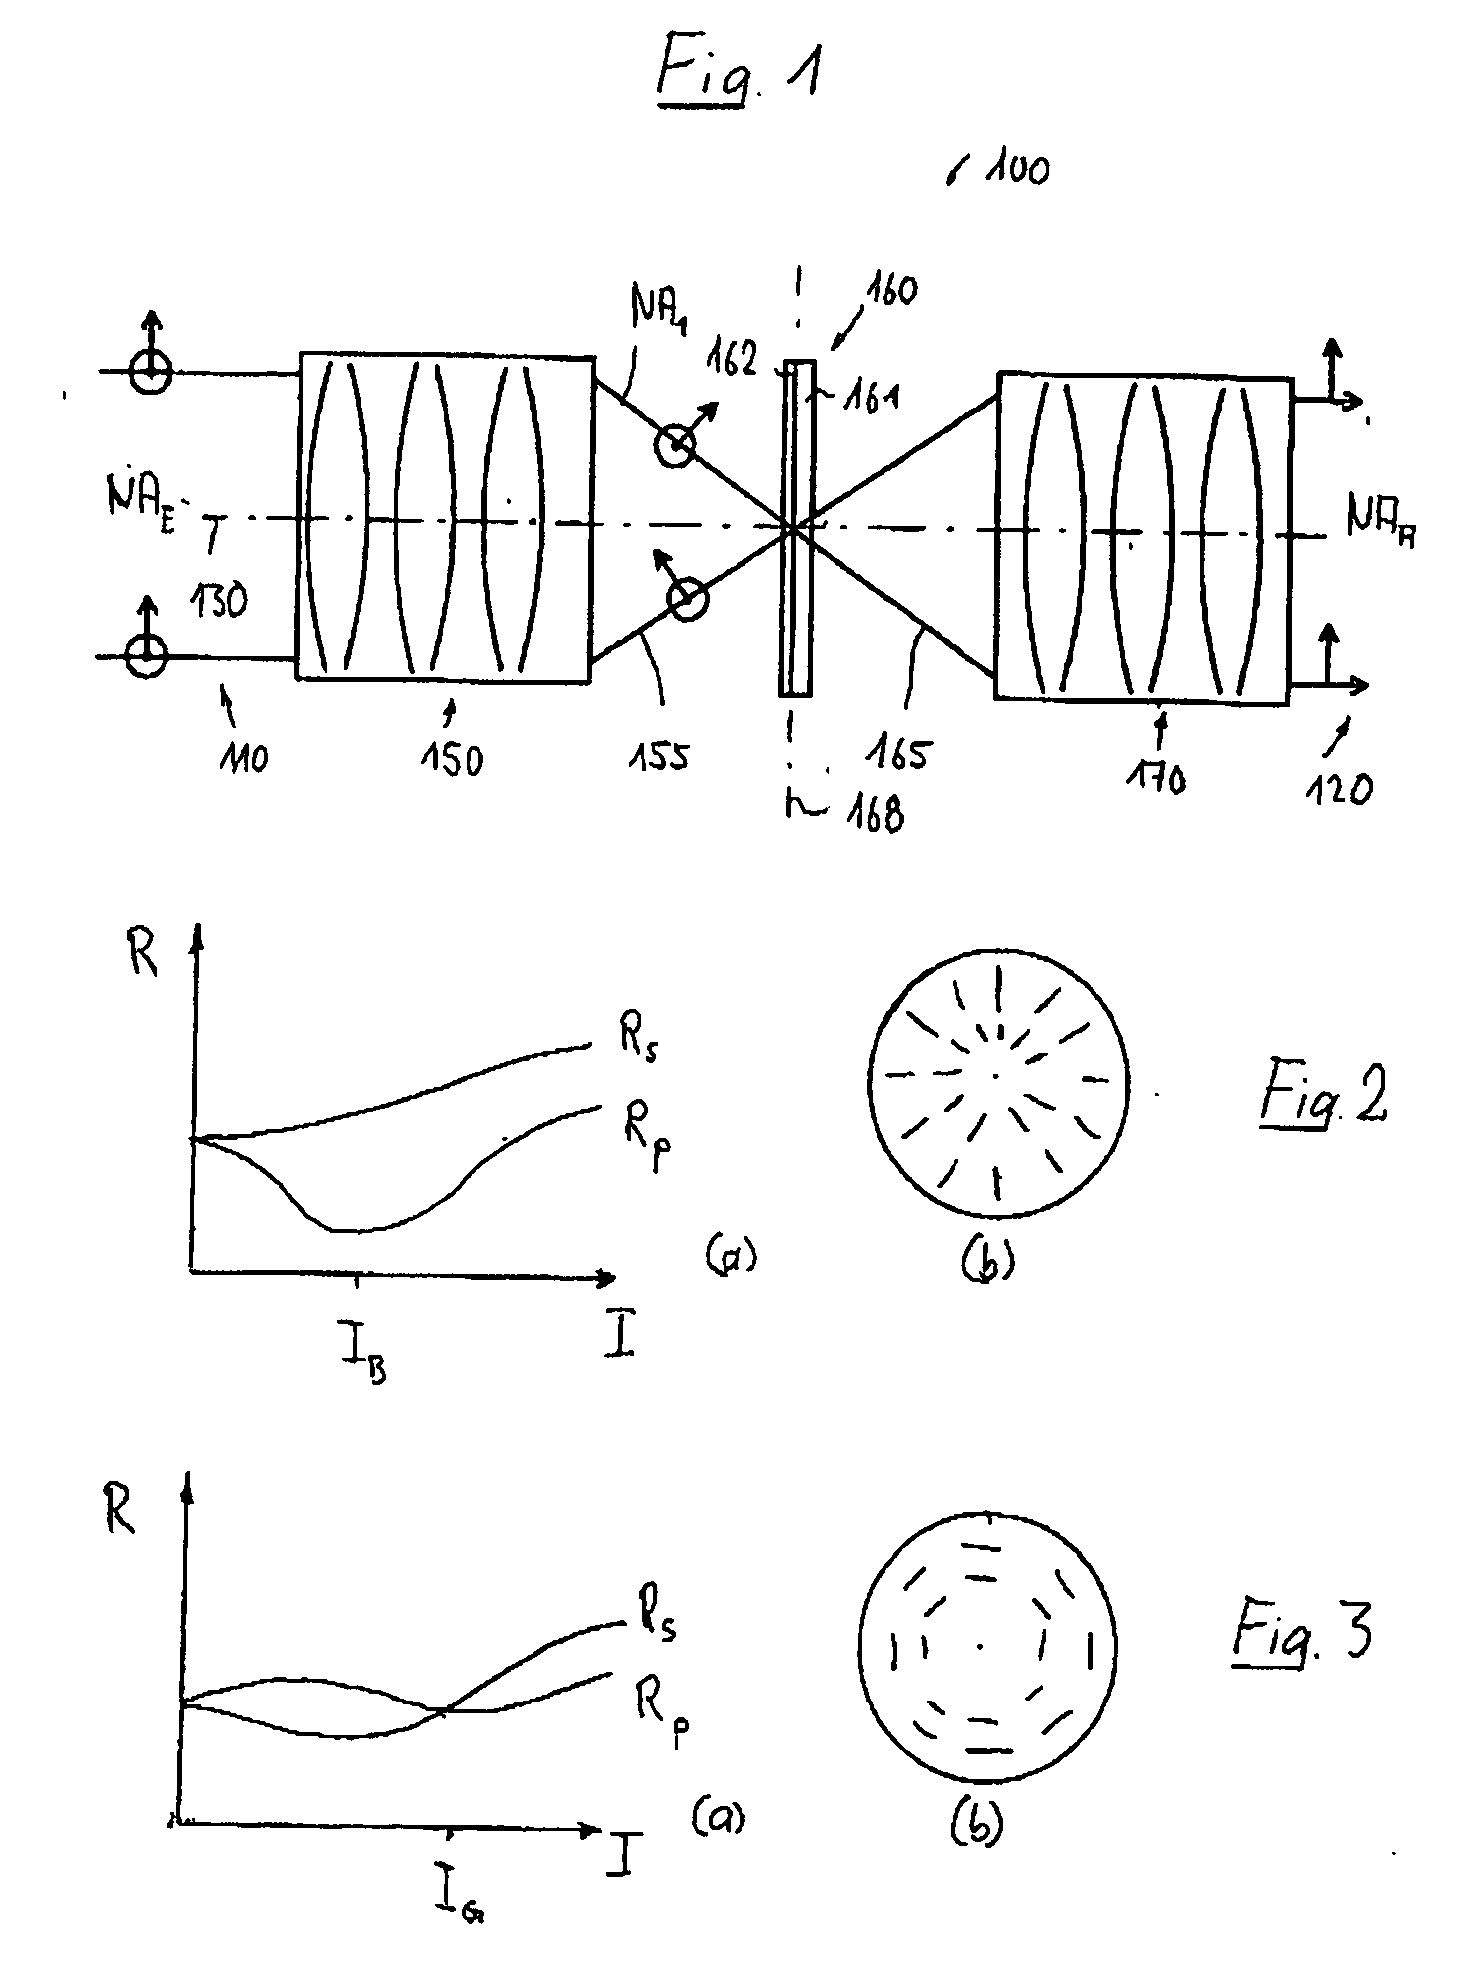 Polarizer device for generating a defined spatial distribution of polarization states